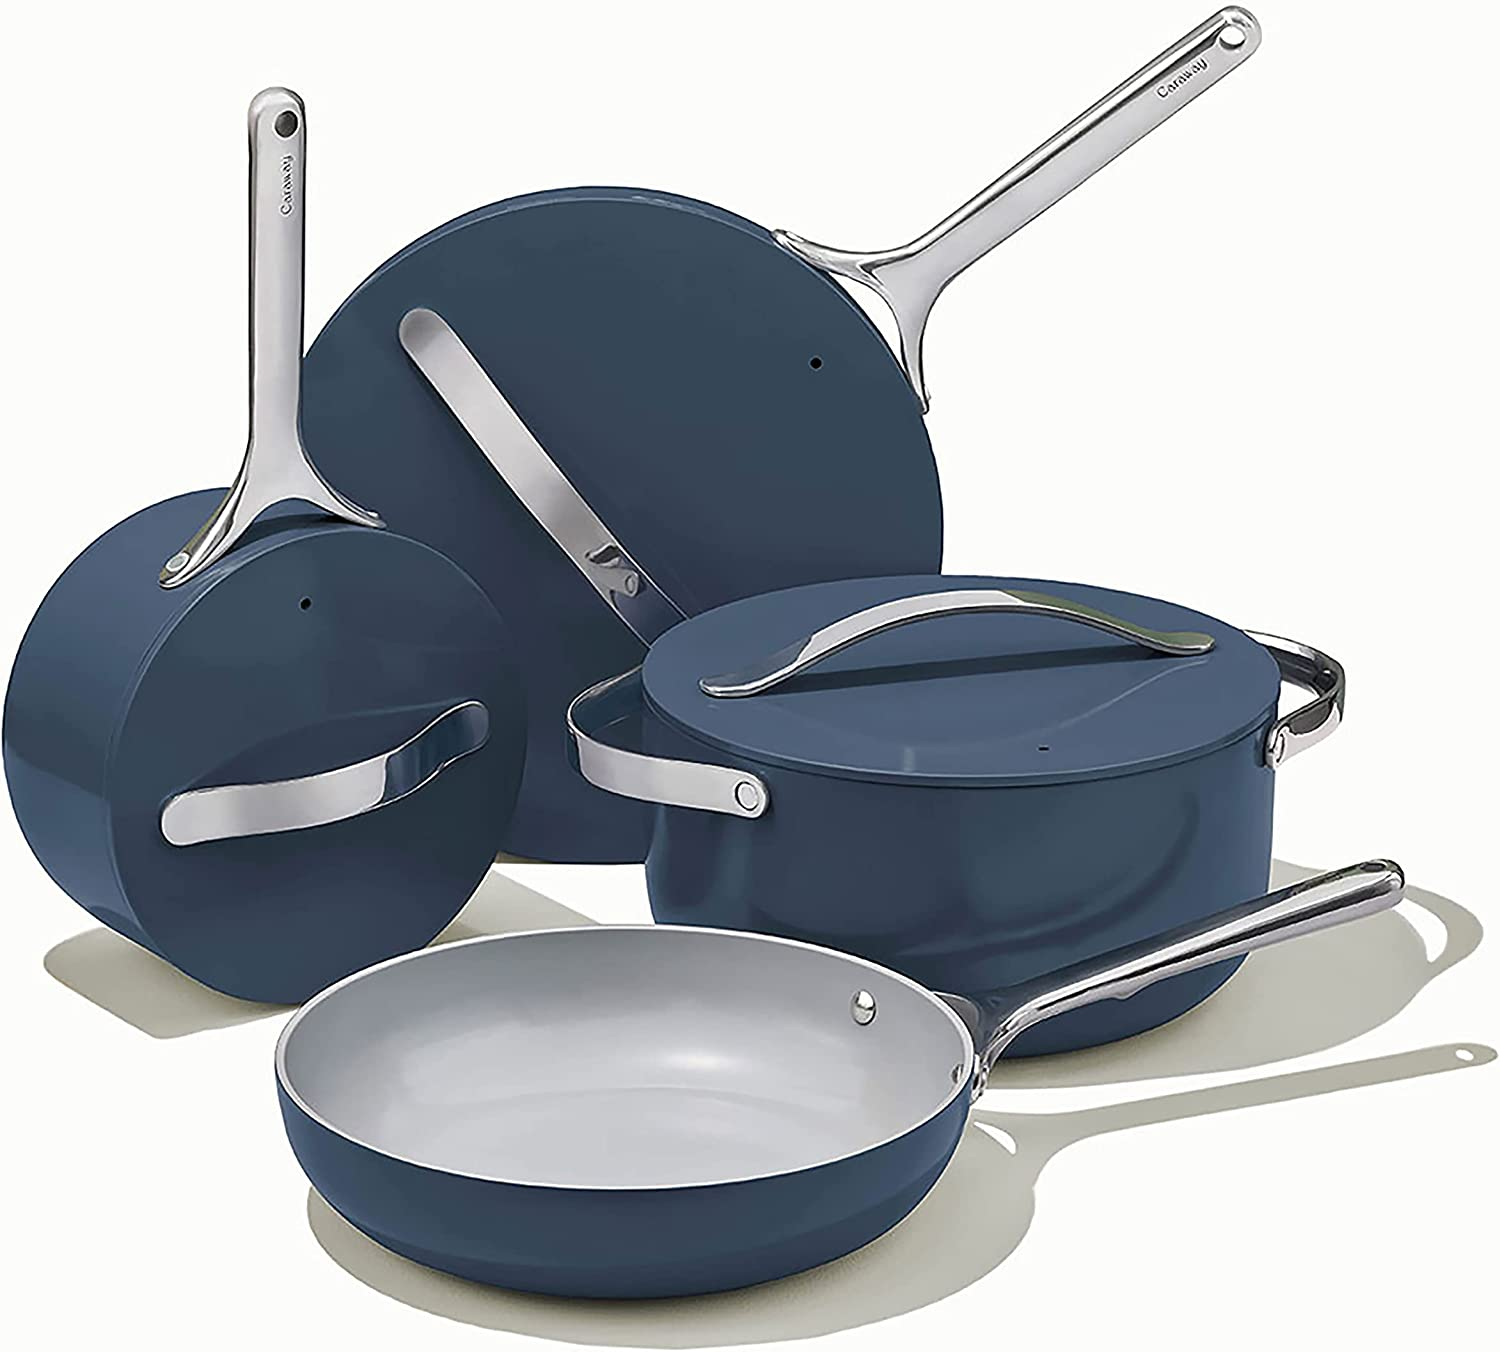 Non-toxic Cookware Brands For A Healthy Kitchen